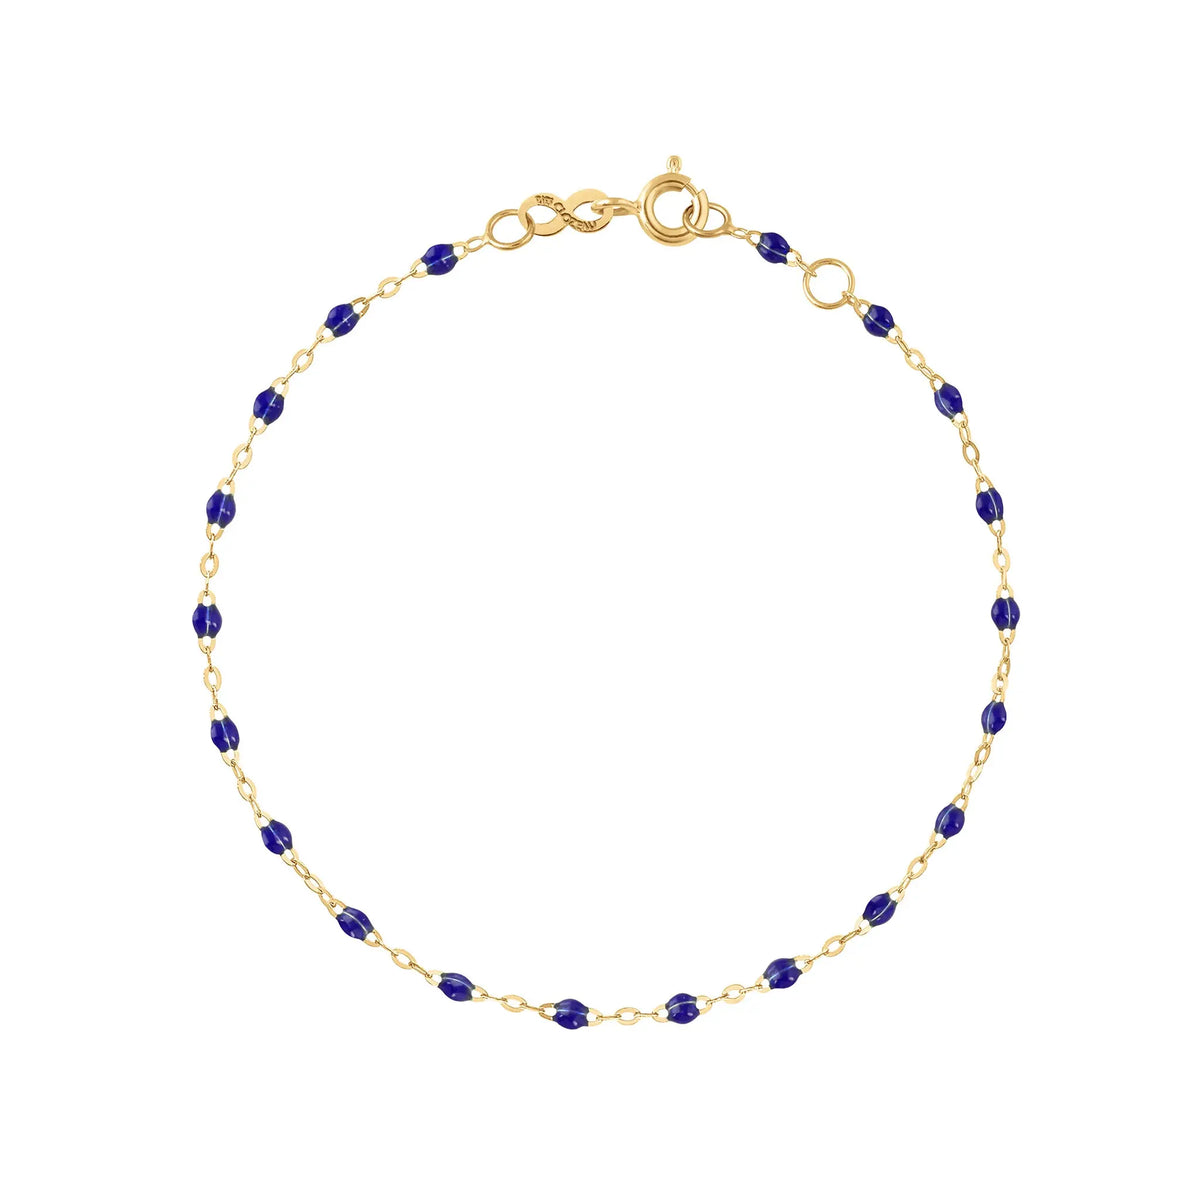 The Classic Gigi bracelet by gigi CLOZEAU features 18K Yellow Gold, and unique Lapis jewels for a simple, everyday look.   Each jewel is unique, artisanally made in their family-owned workshop. 18K yellow gold and resin. The bracelet measures 6.7 inches with adjustable clasp at 6.3 inches.